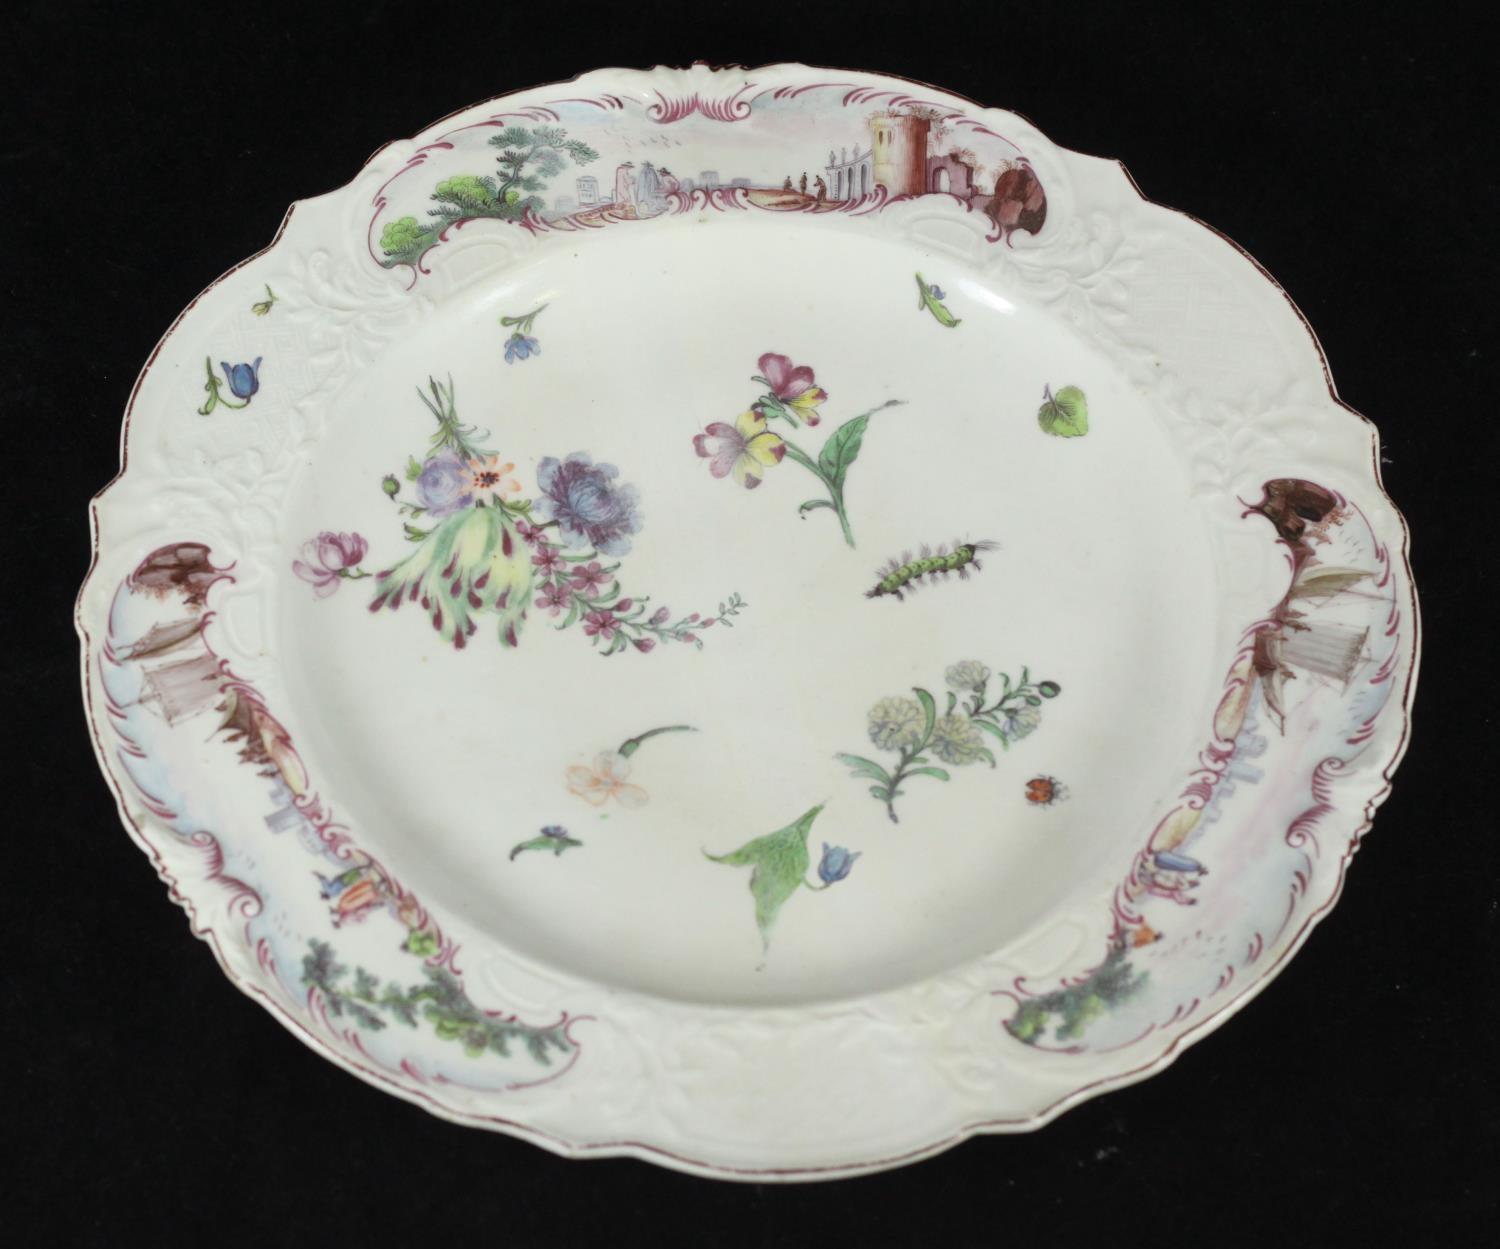 A Chelsea 'Warren Hastings' type Red Anchor period dessert plate, moulded in relief in the rococo